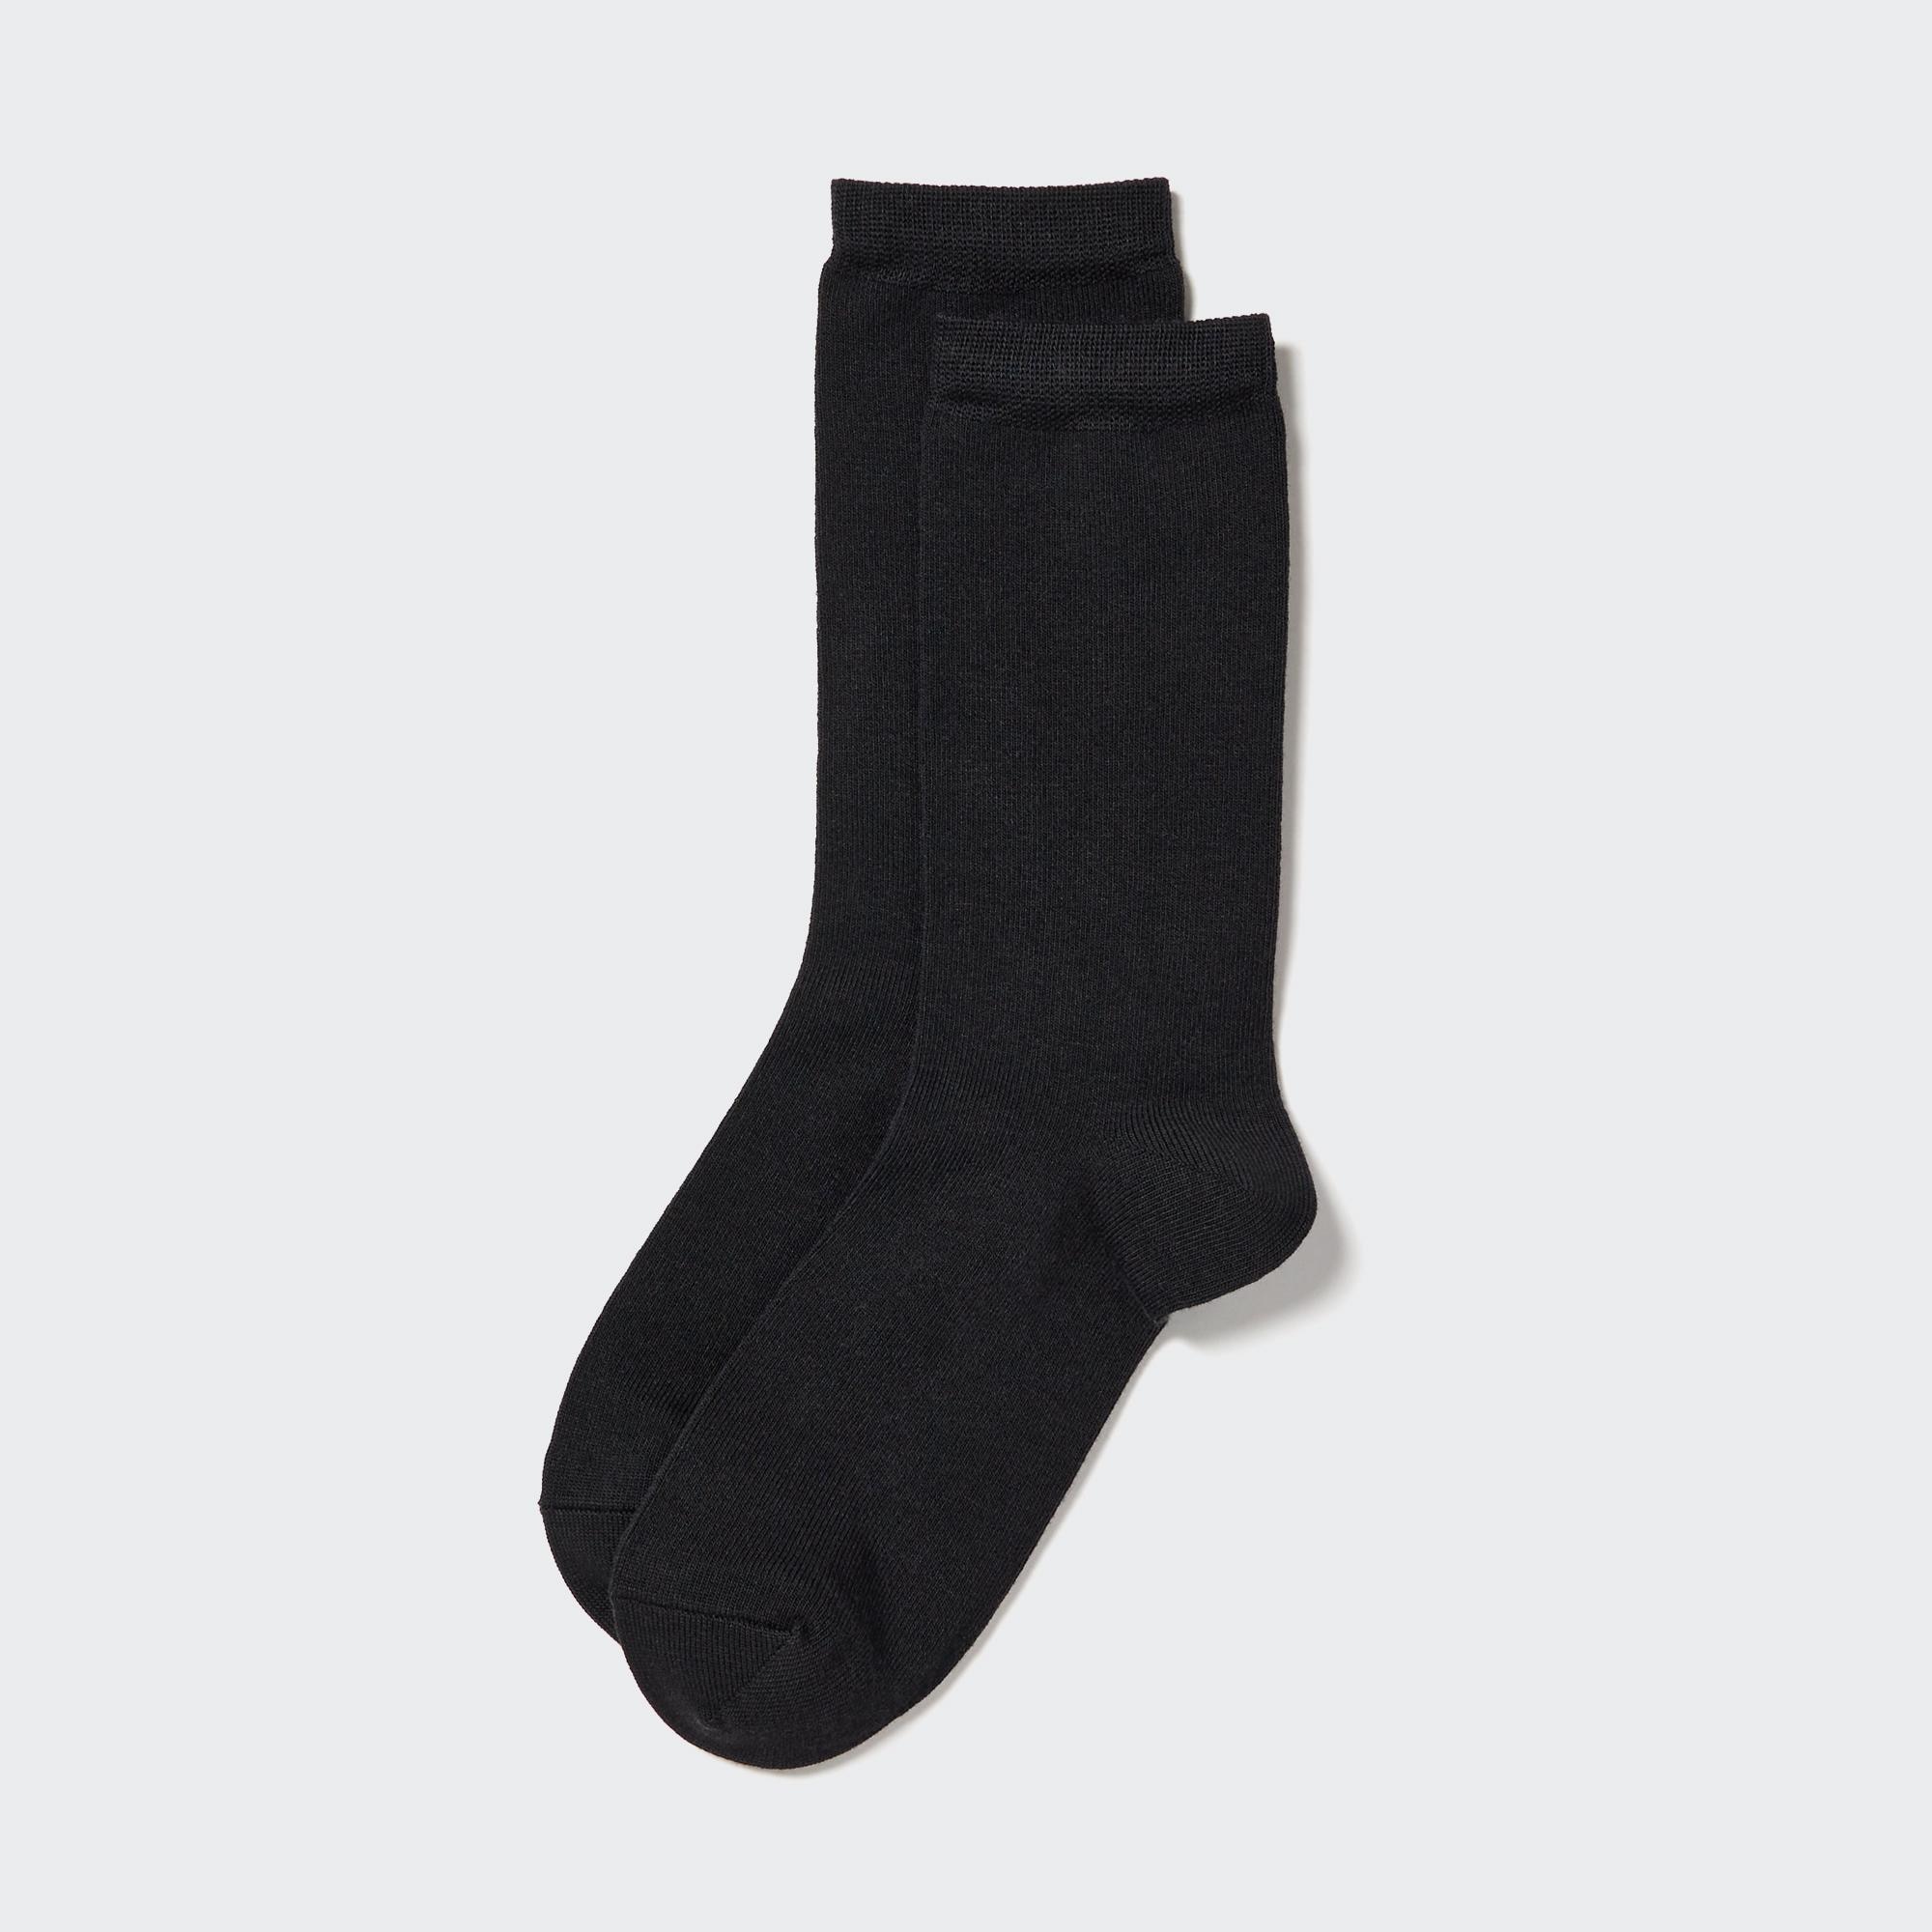 Sports Socks Are The Most Affordable Accessory Of The Season